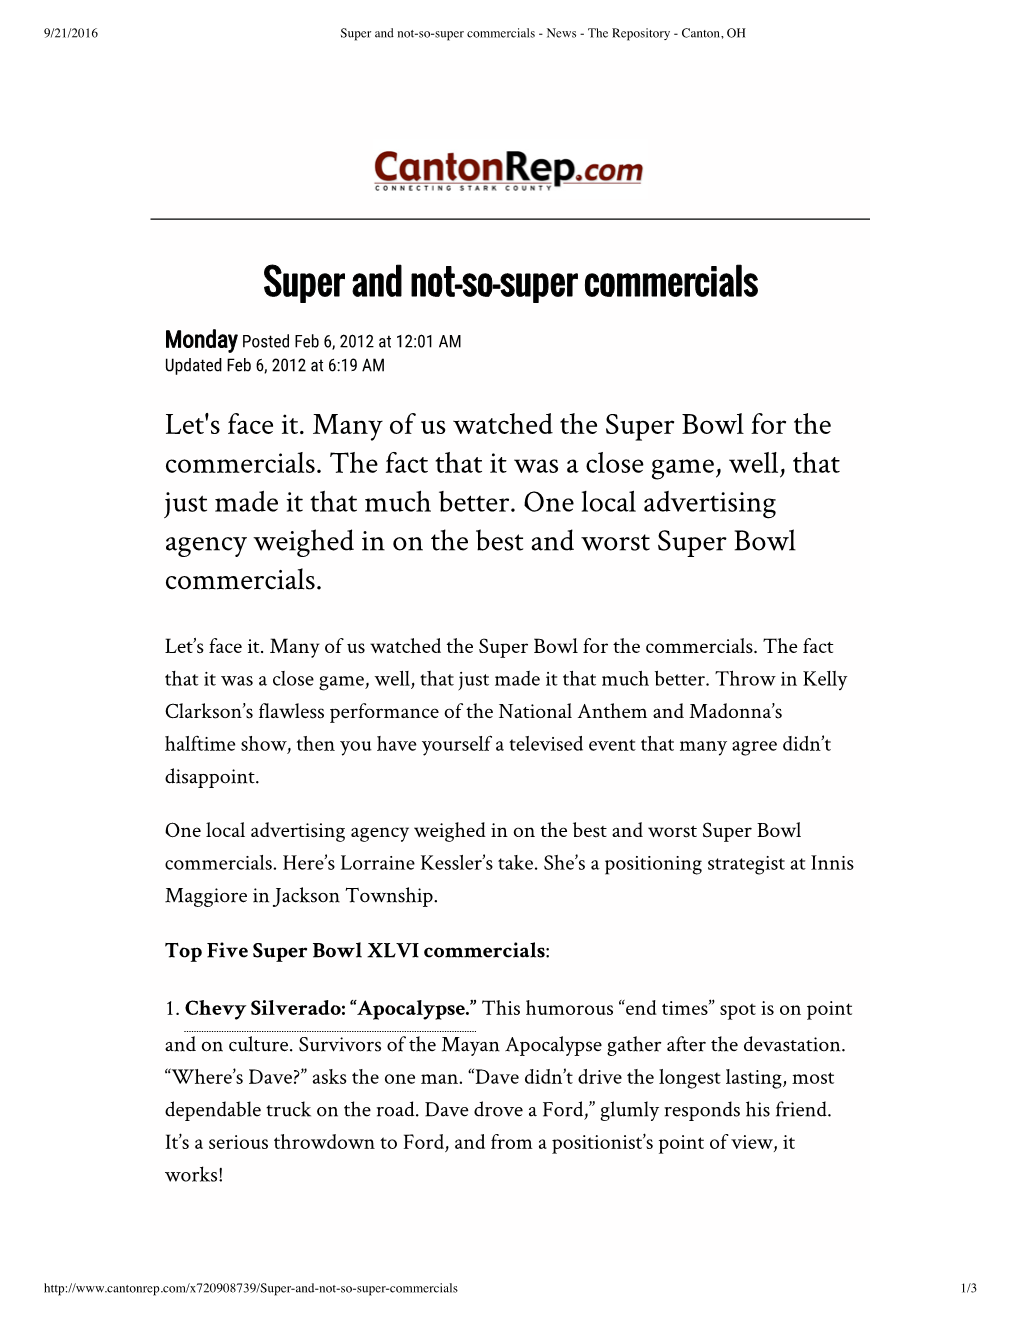 Super and Not-So-Super Commercials - News - the Repository - Canton, OH